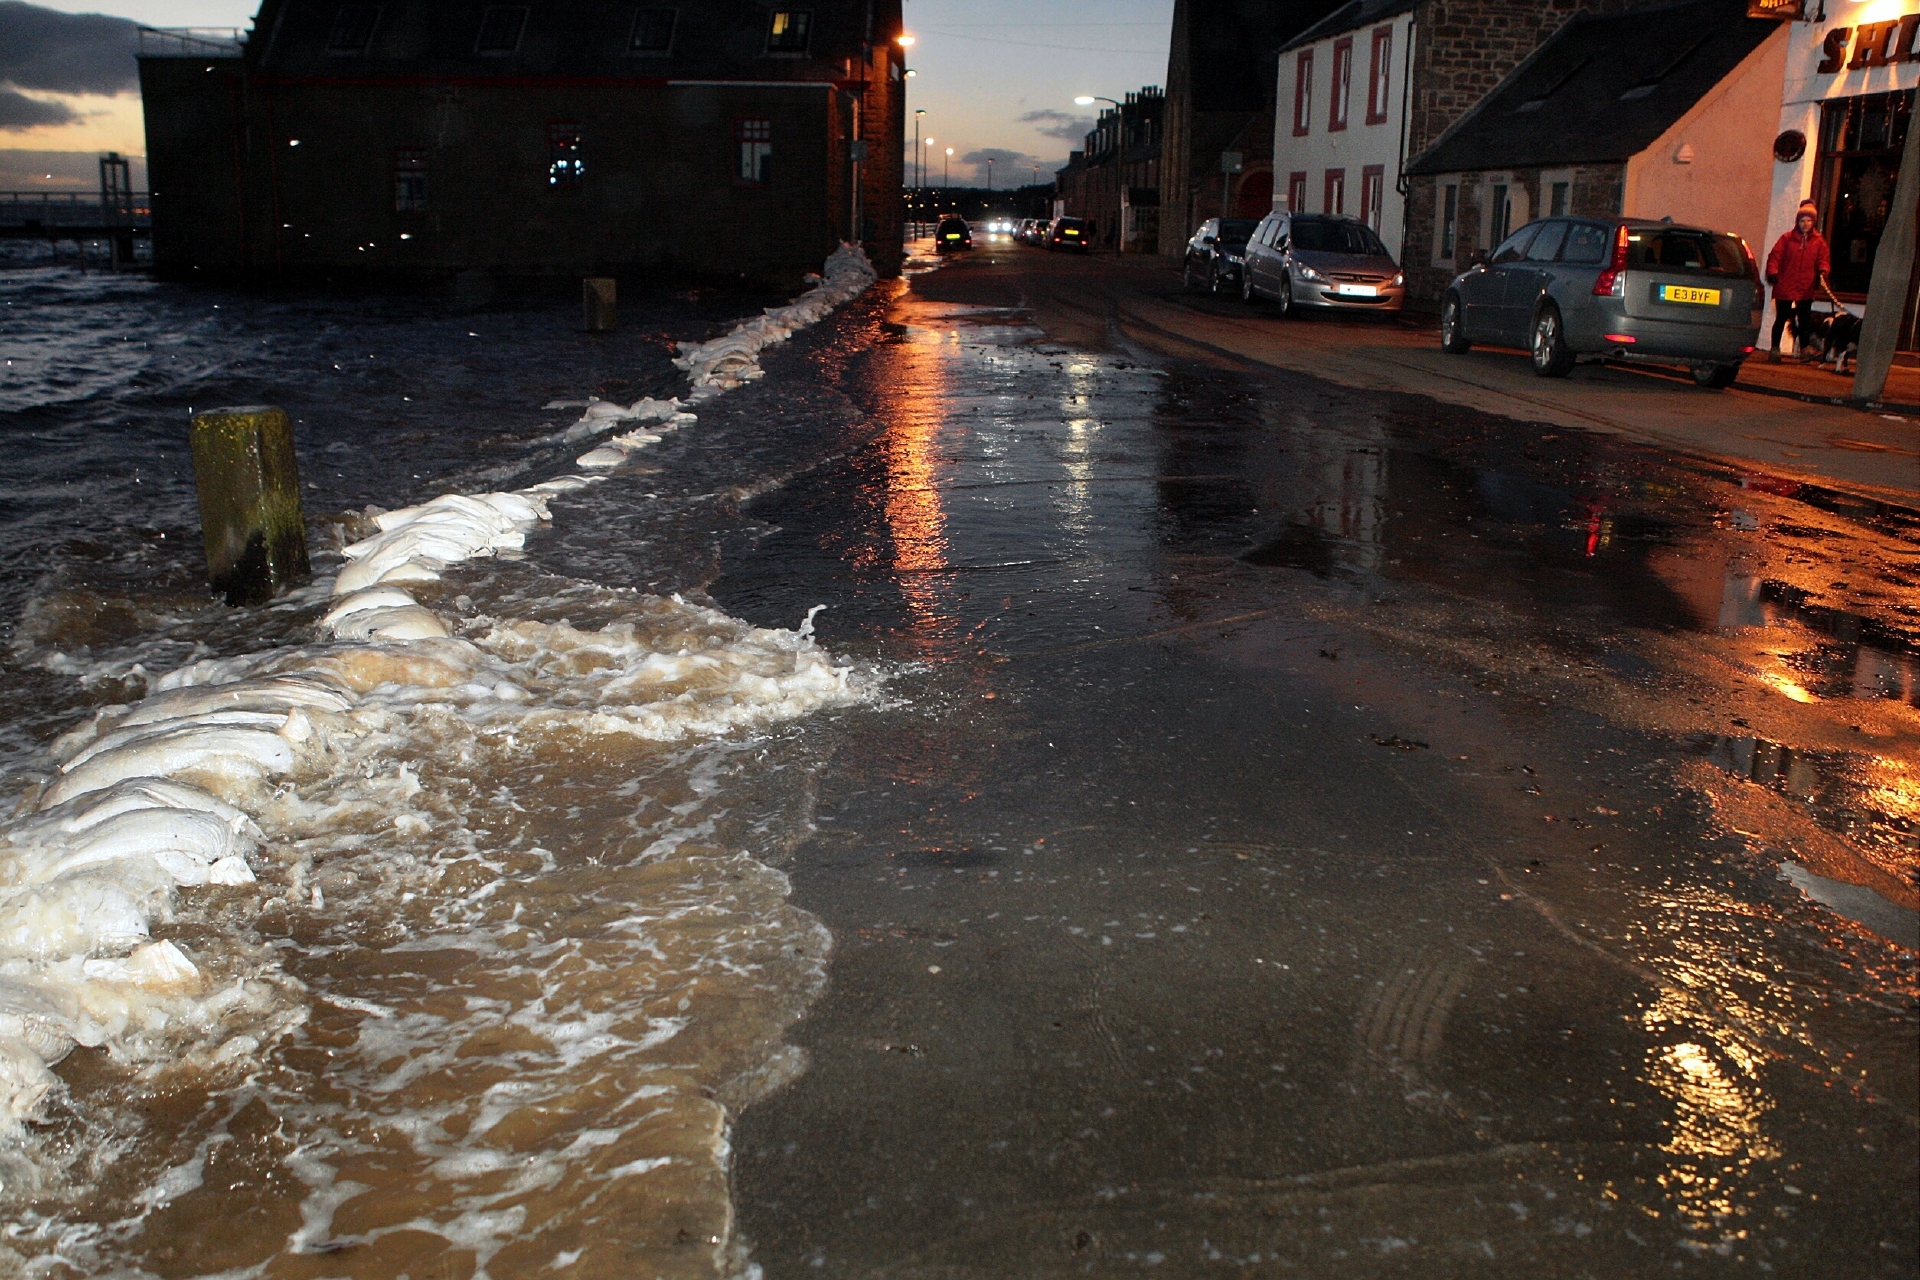 Areas of the Ferry have been identified as being at risk of flooding.